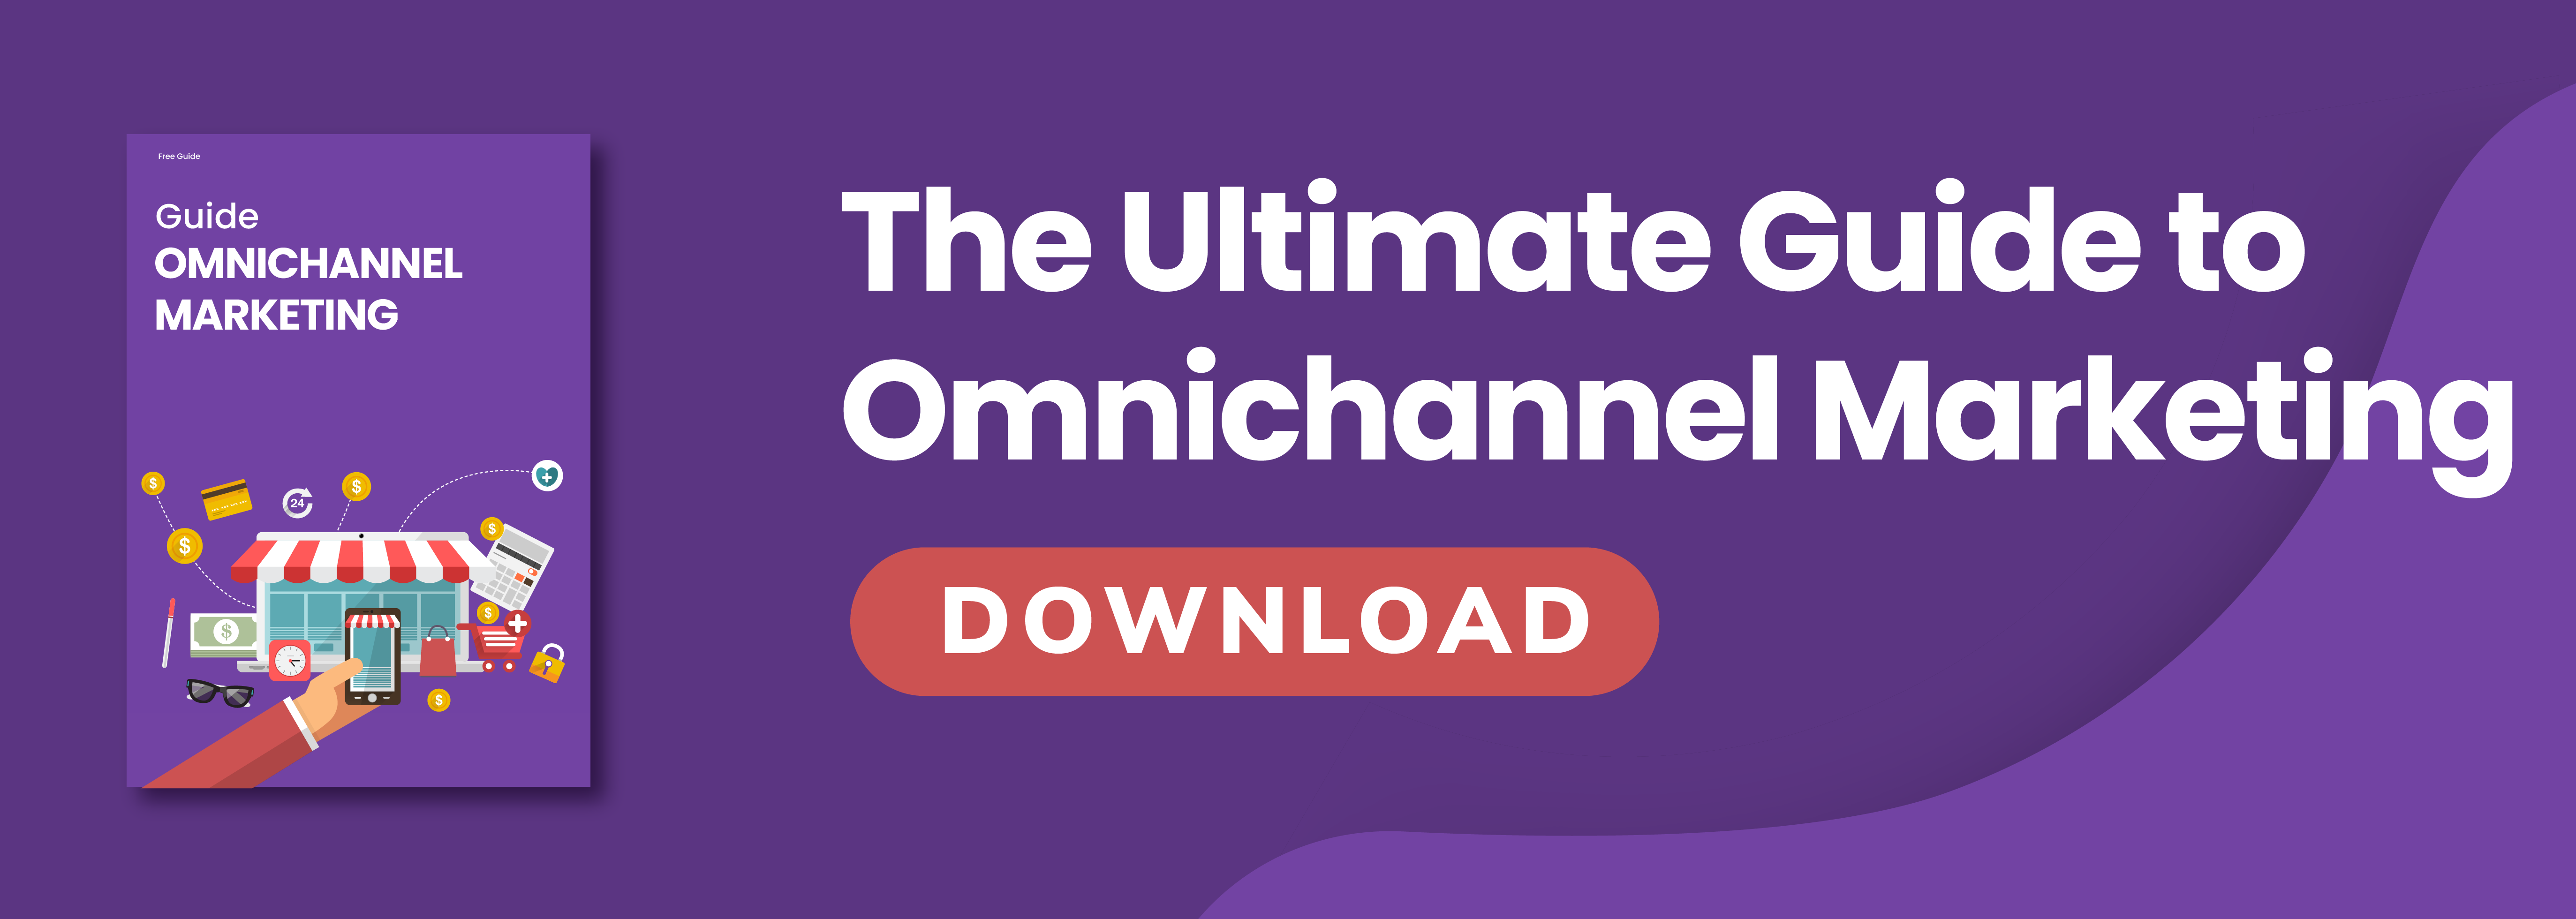 The ultimate guide to omnichannel marketing - download now